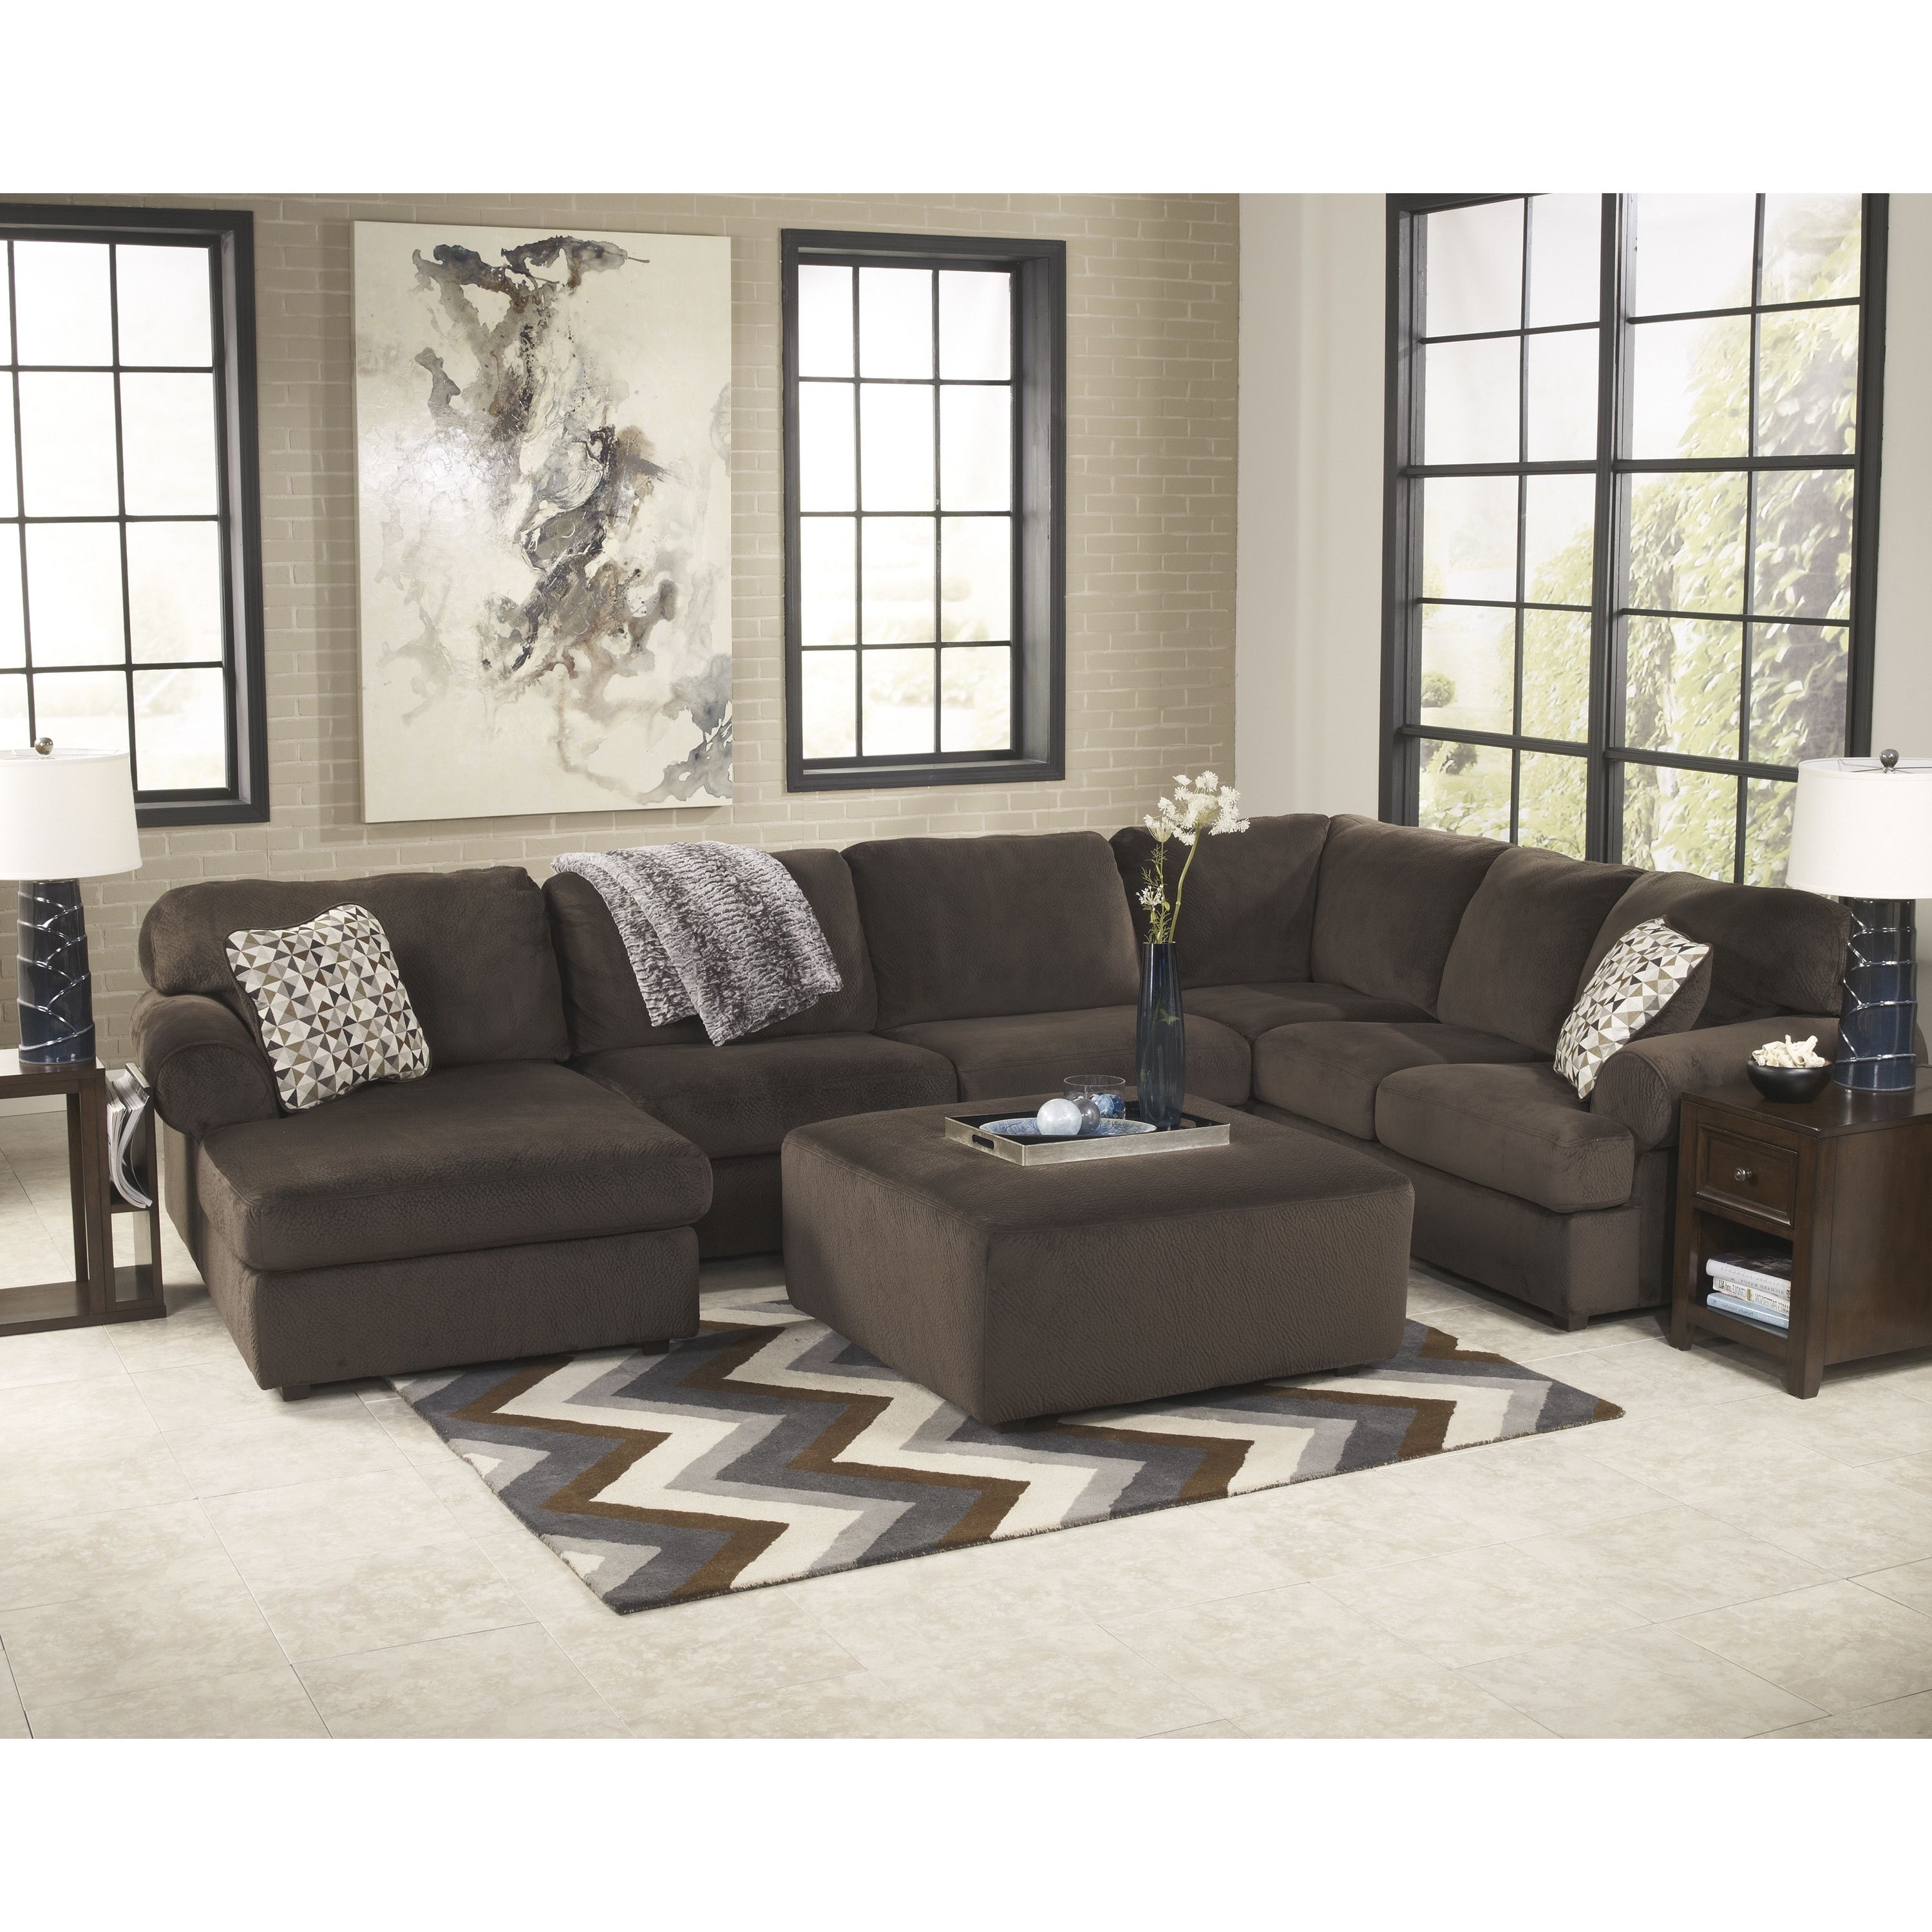 Free Wayfair Sectionals Furniture Using Pretty Cheap Sectional Sofas Intended For Wayfair Sectional Sofas (Photo 4 of 10)